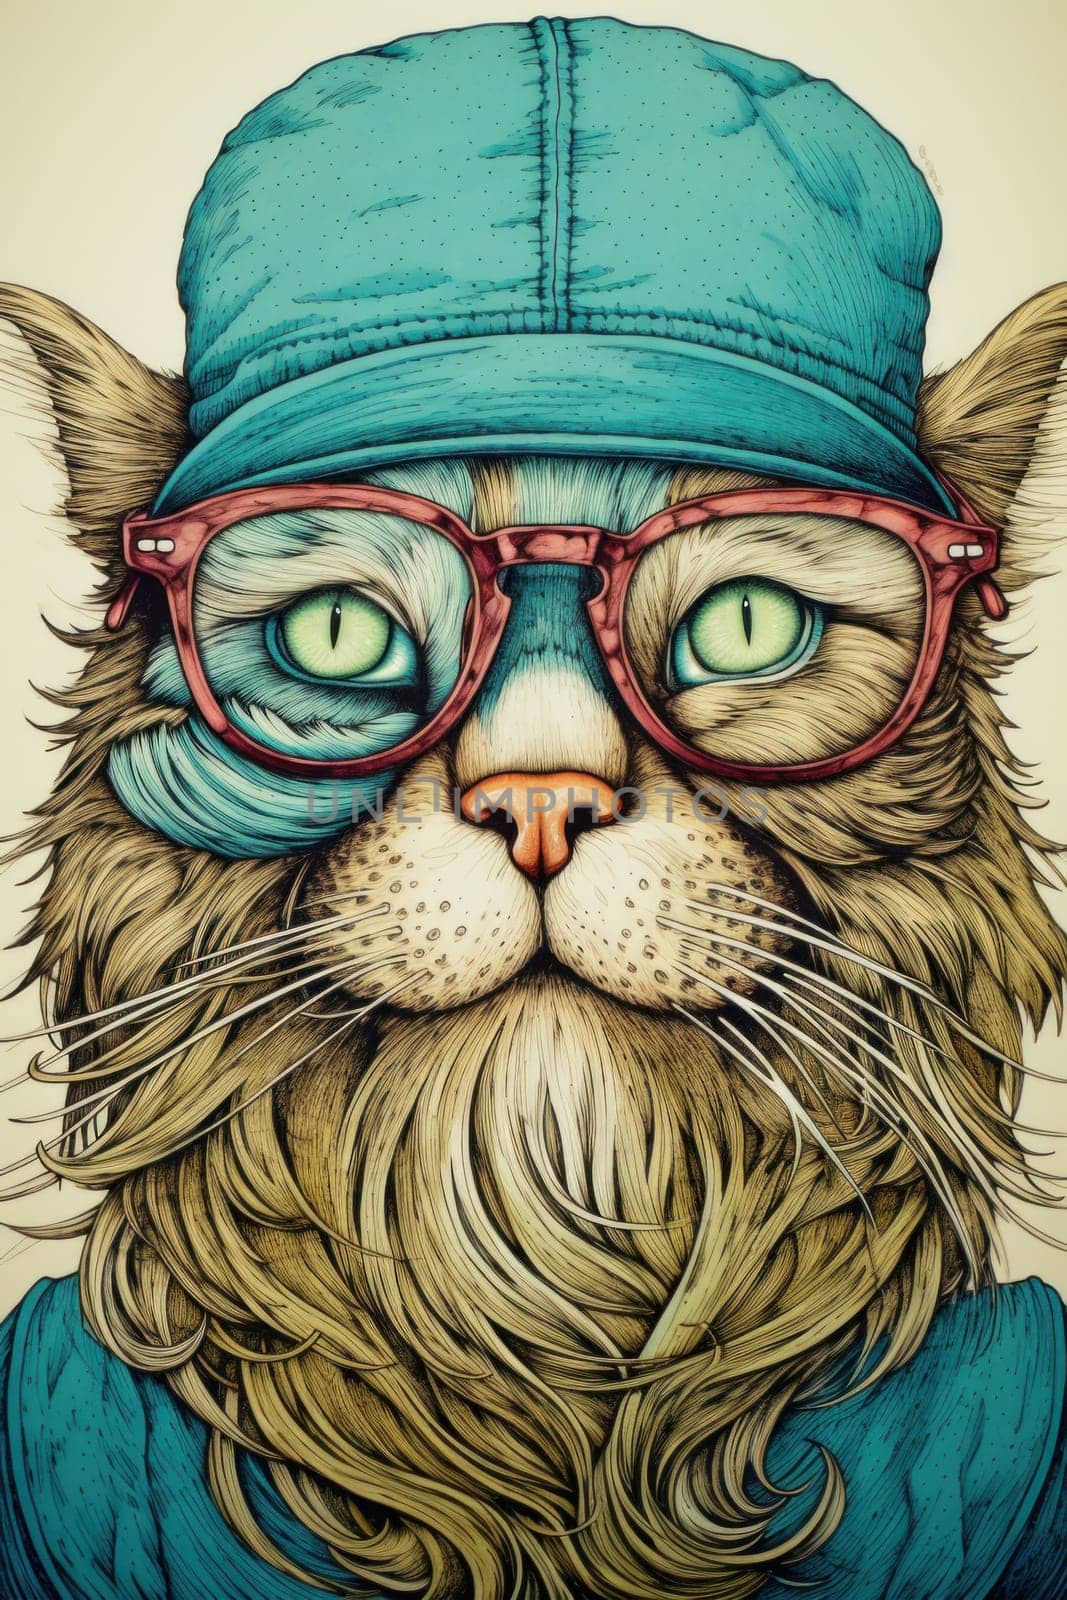 A drawing of a cat wearing a hat and glasses